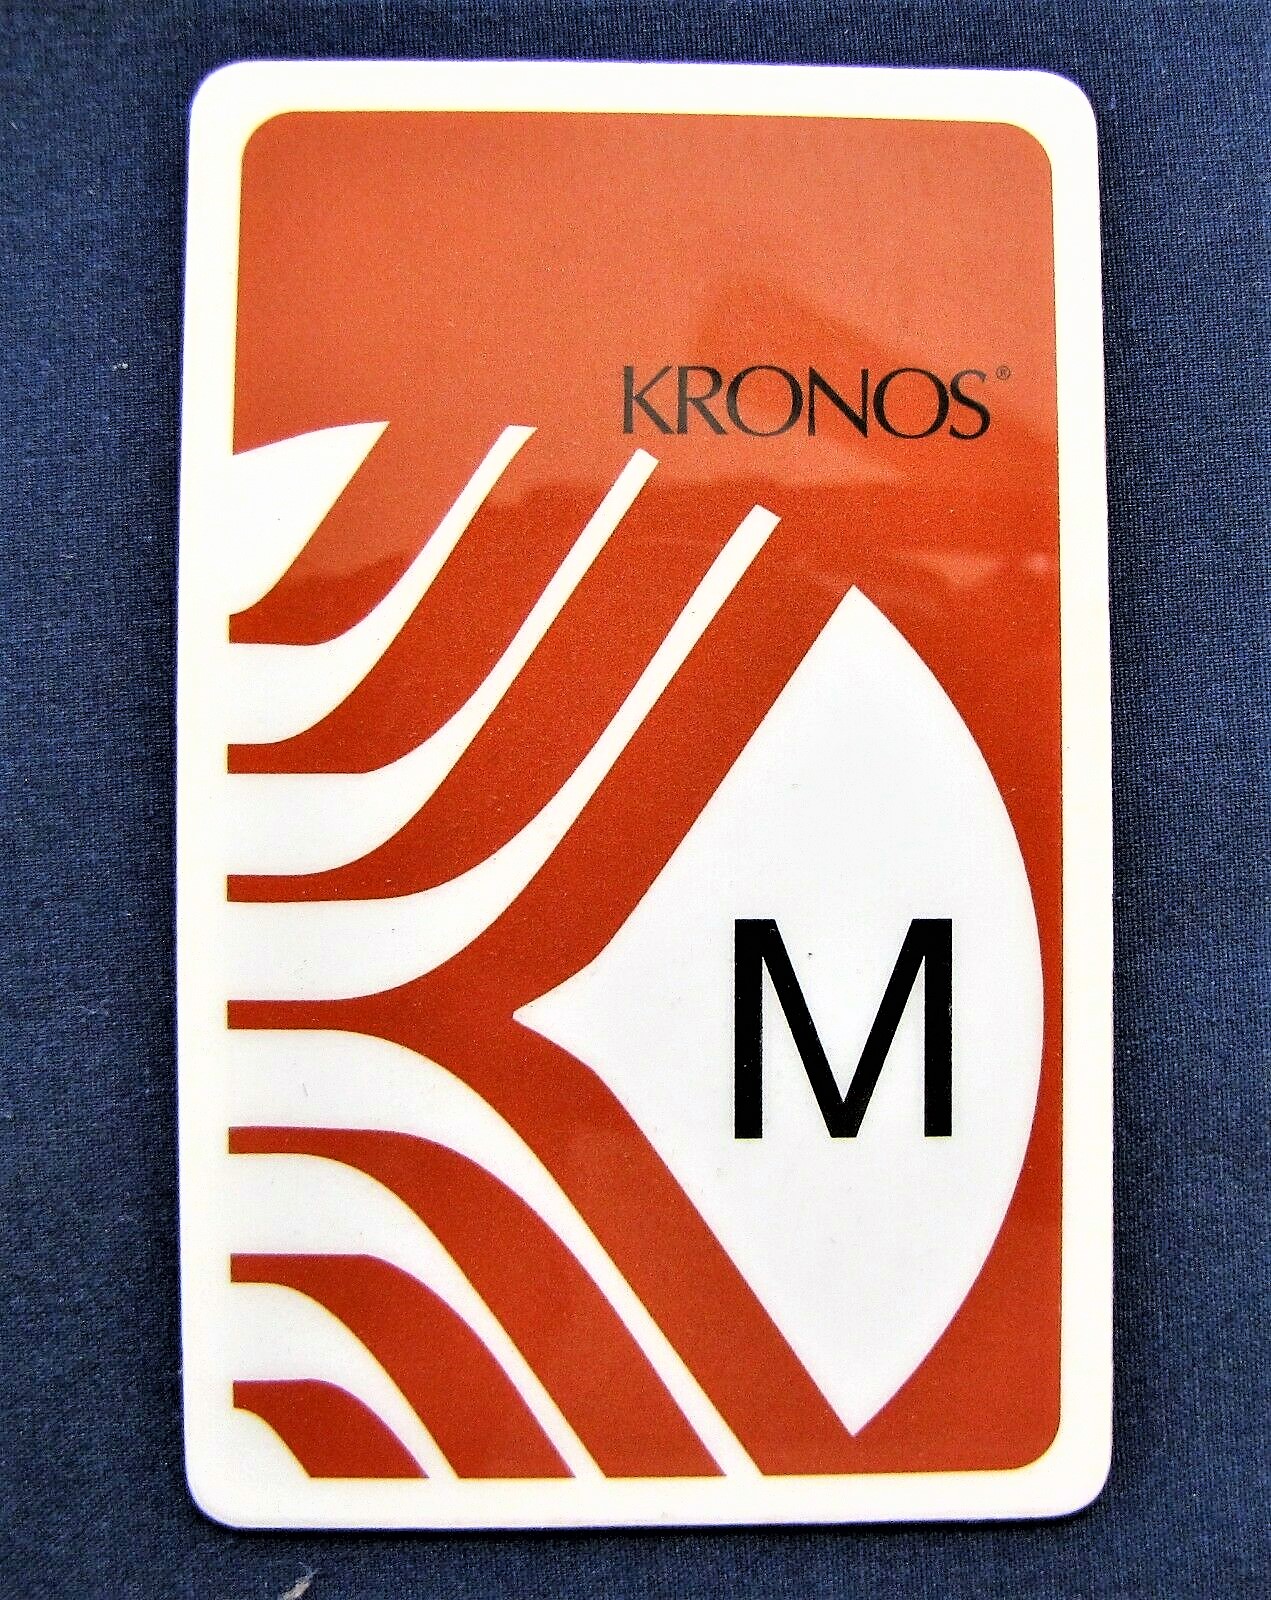 KRONOS  M CARD FOR CONFIGURING THE KRONOS TIME CLOCKS